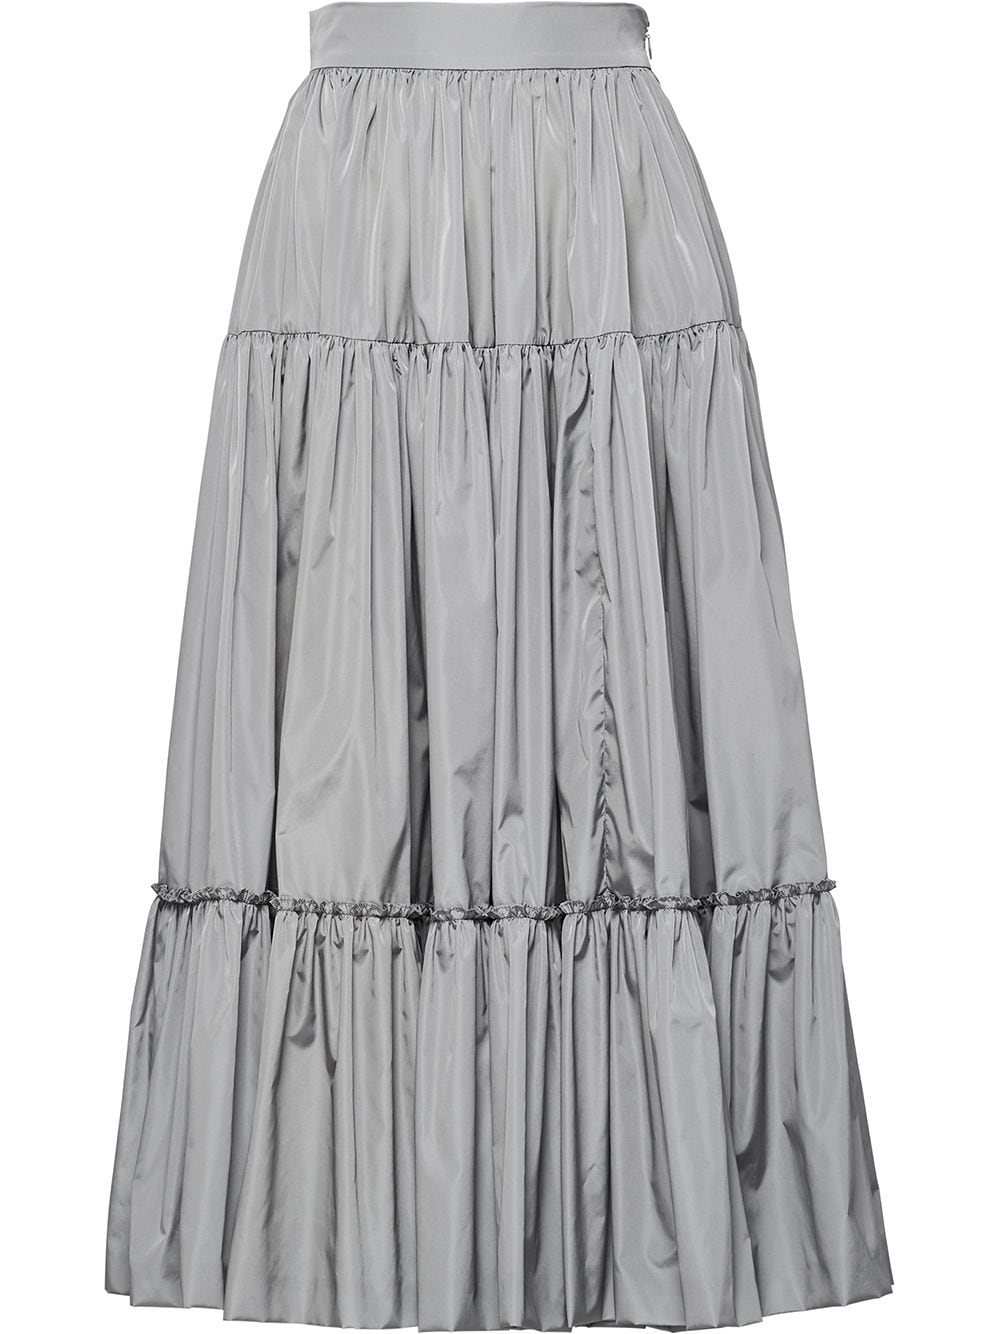 Shop Prada full tiered midi skirt with Express Delivery